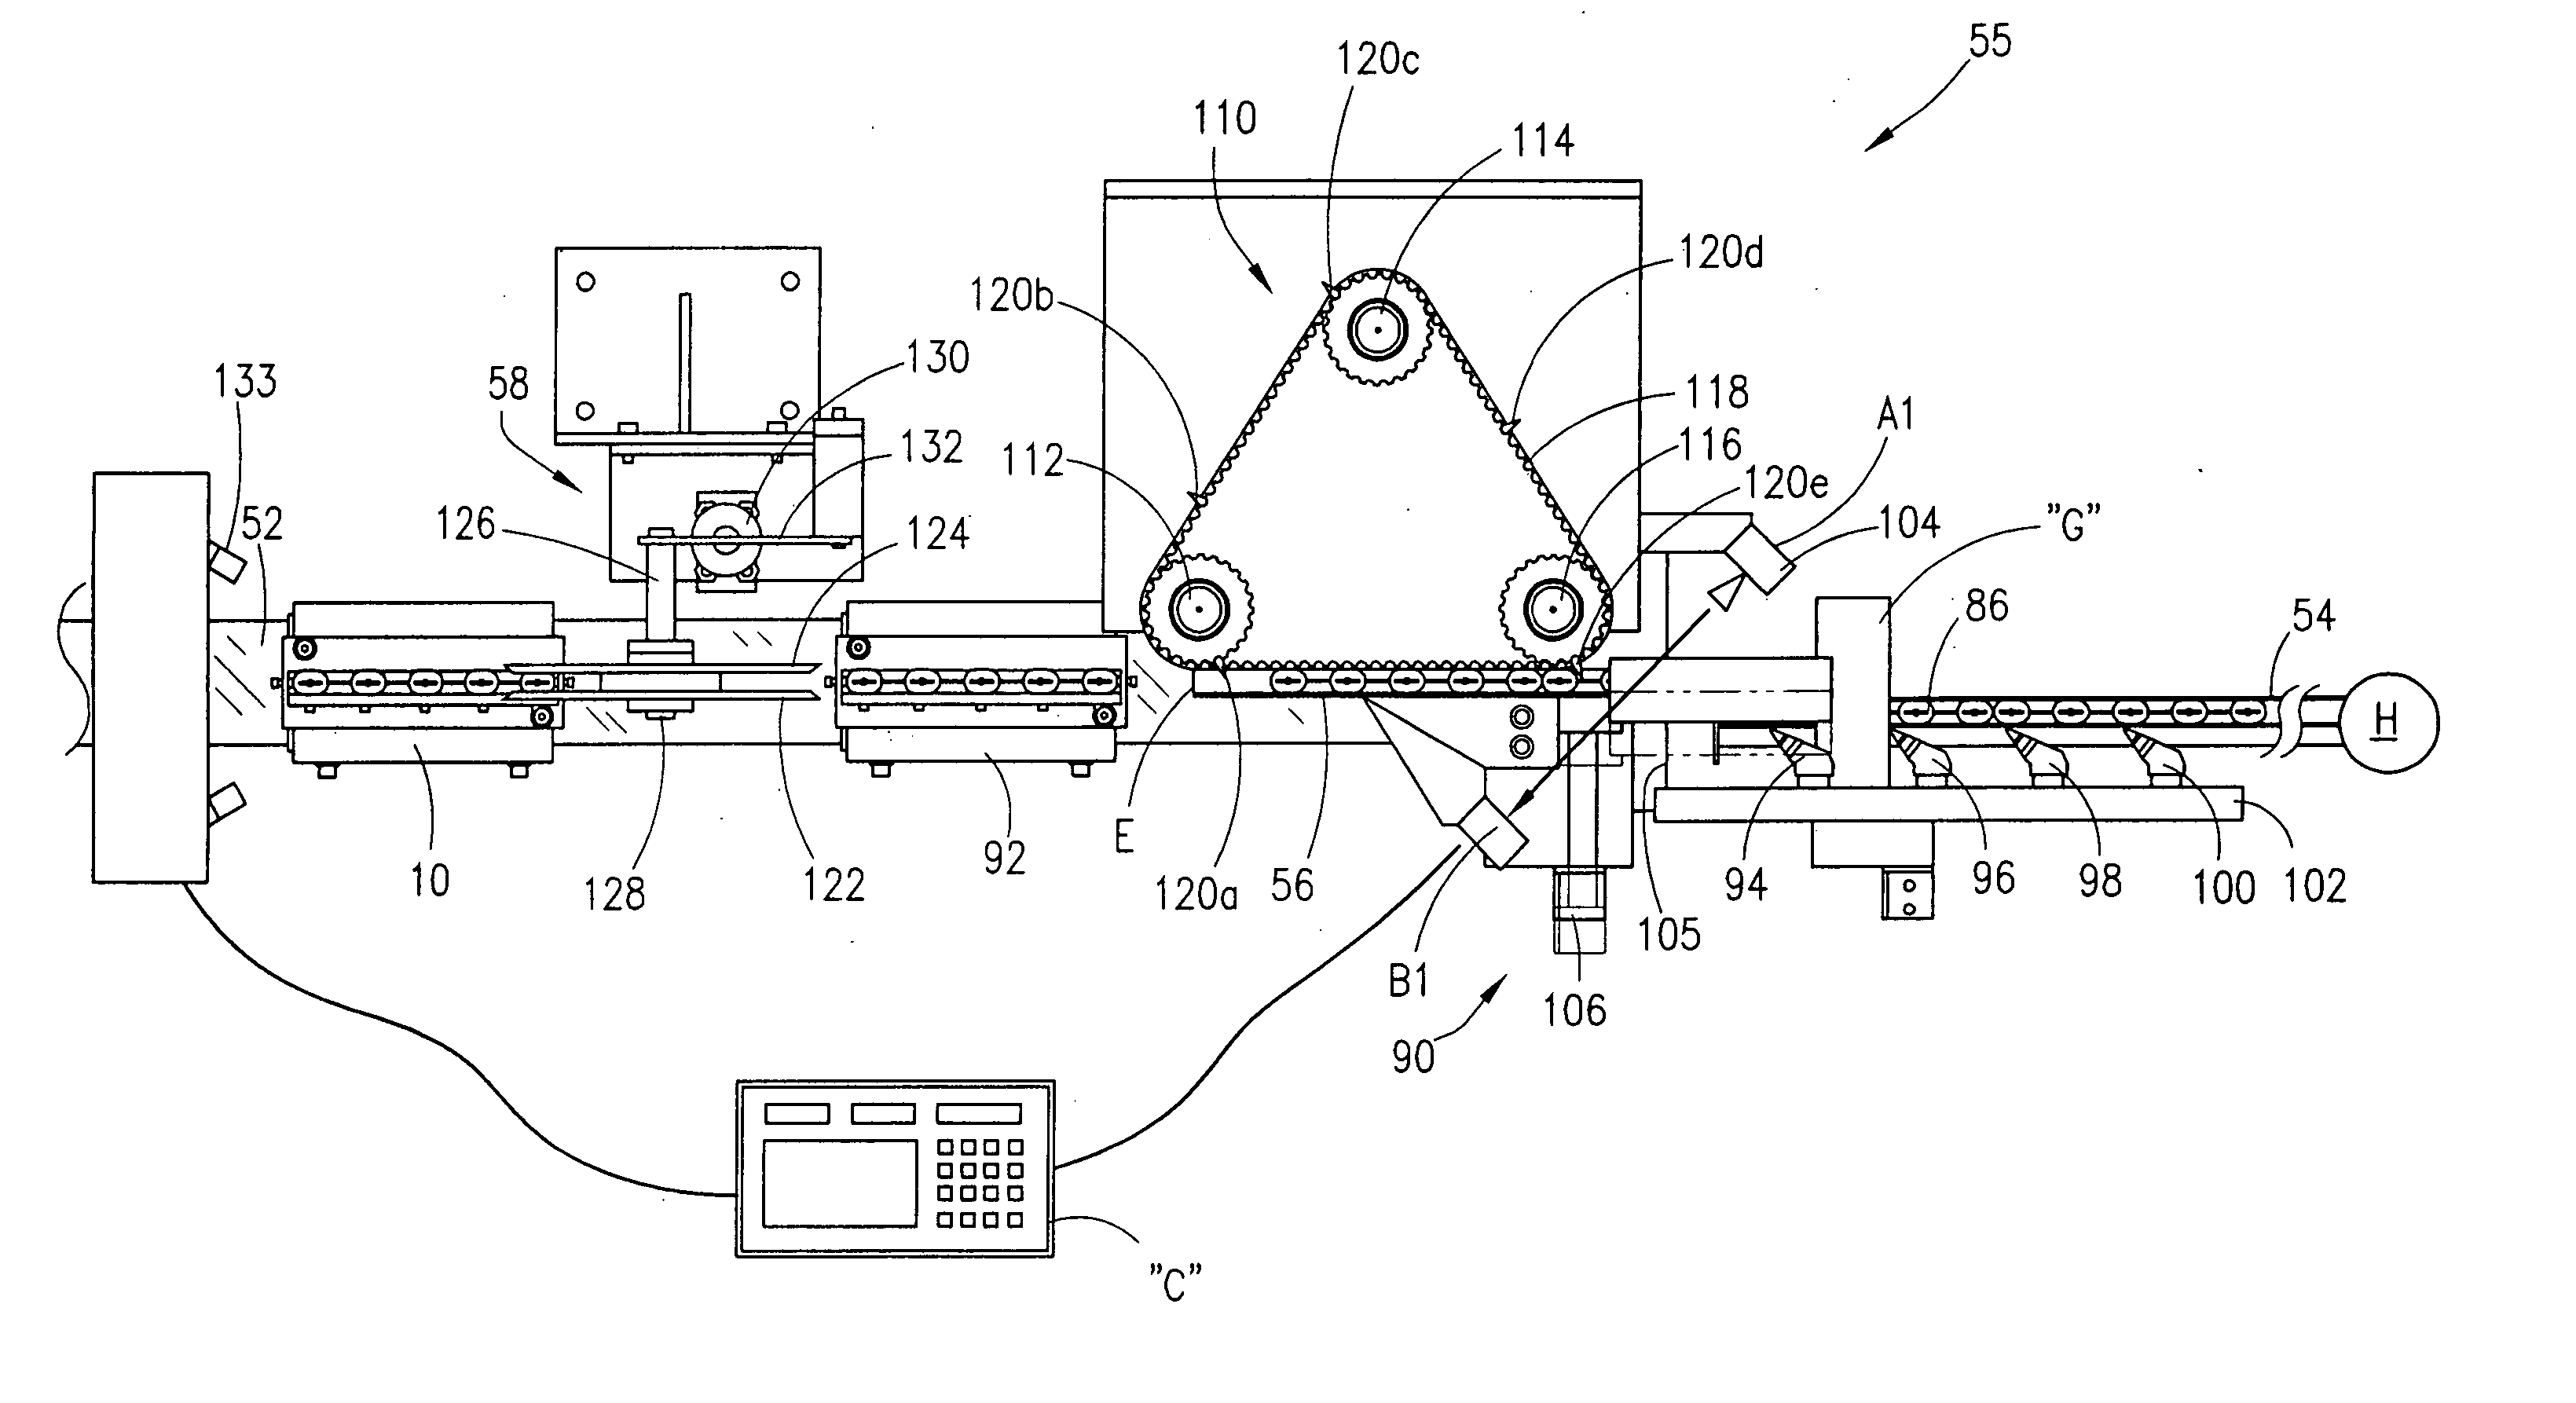 Apparatus and method for imprinting a vial